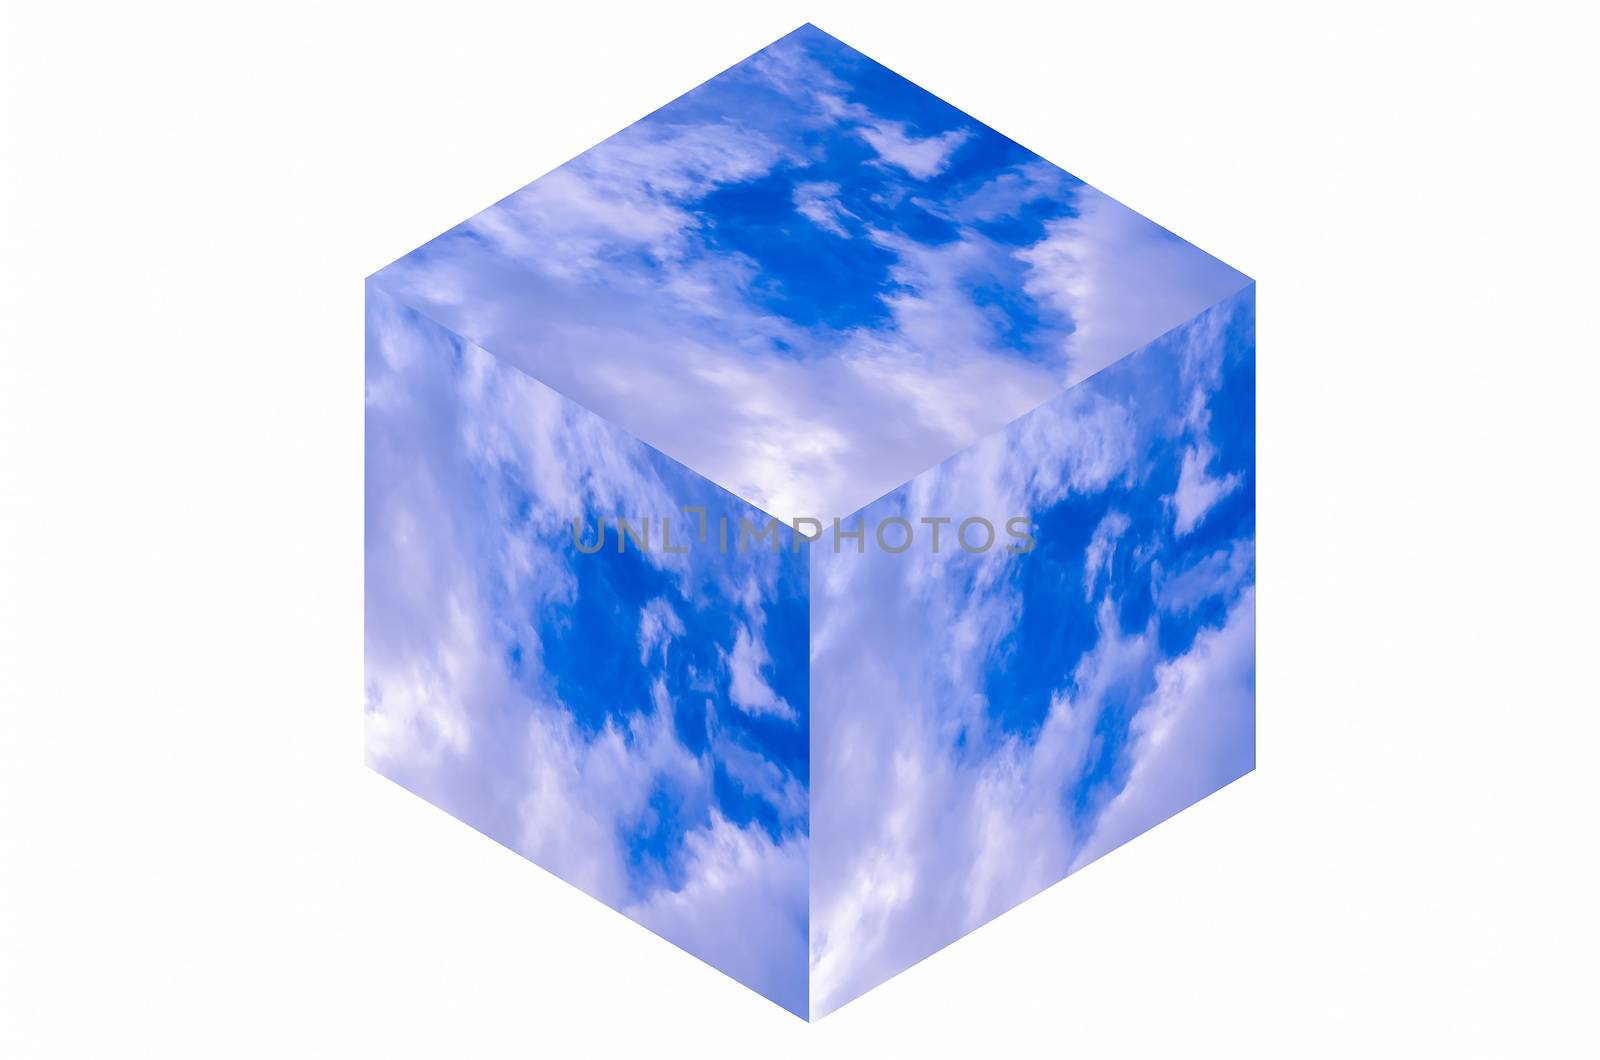 Cube with clouds photo by JFsPic